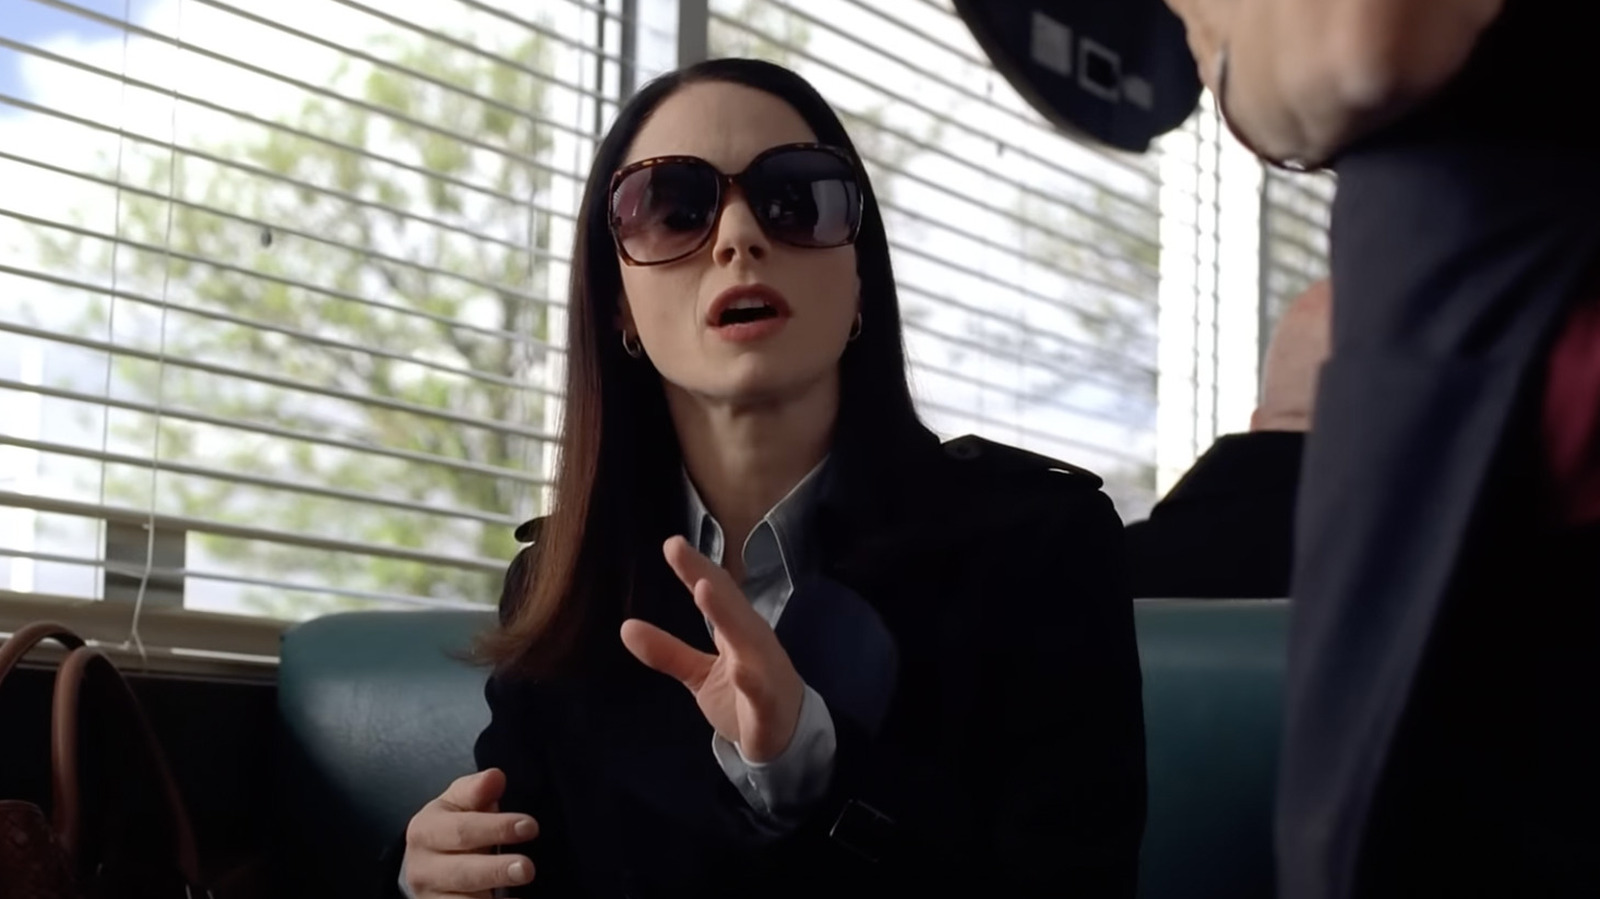 Breaking Bad's Laura Fraser Landed The Role Of Lydia Without Ever Seeing  The Show